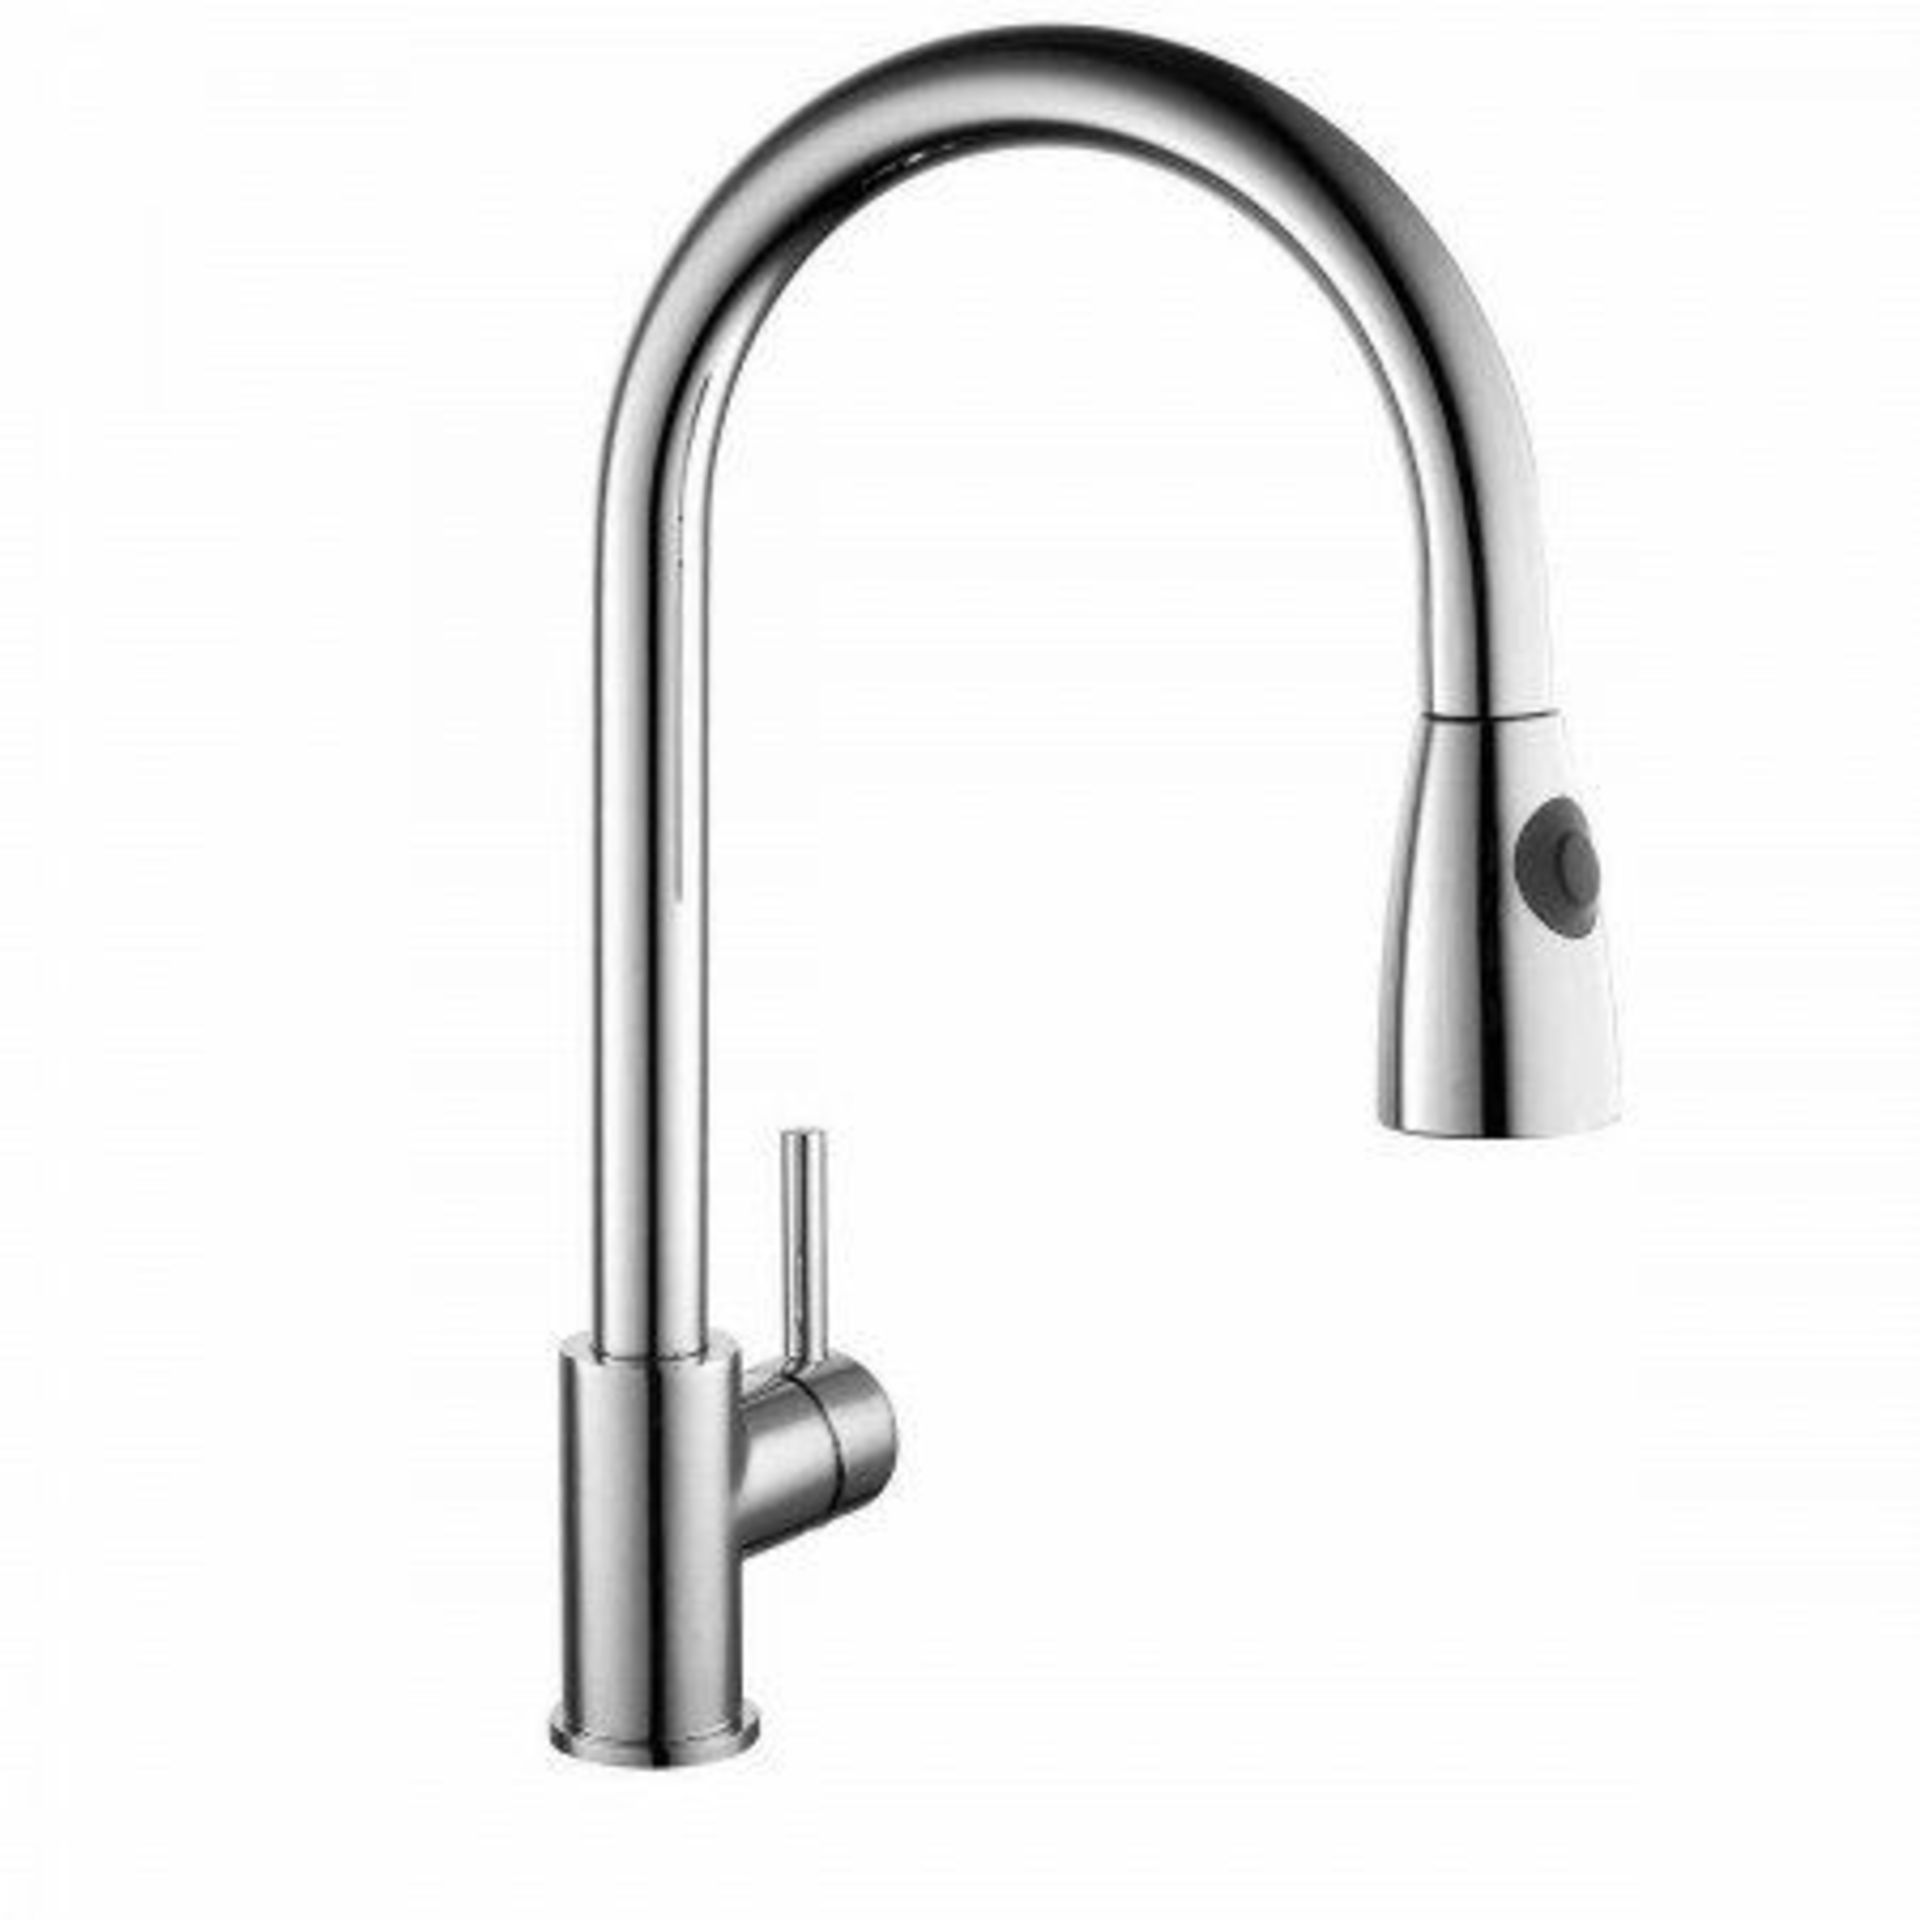 K-VIT KST003 Kitchen Sink Mixer With Pull Out Spray Polished Chrome